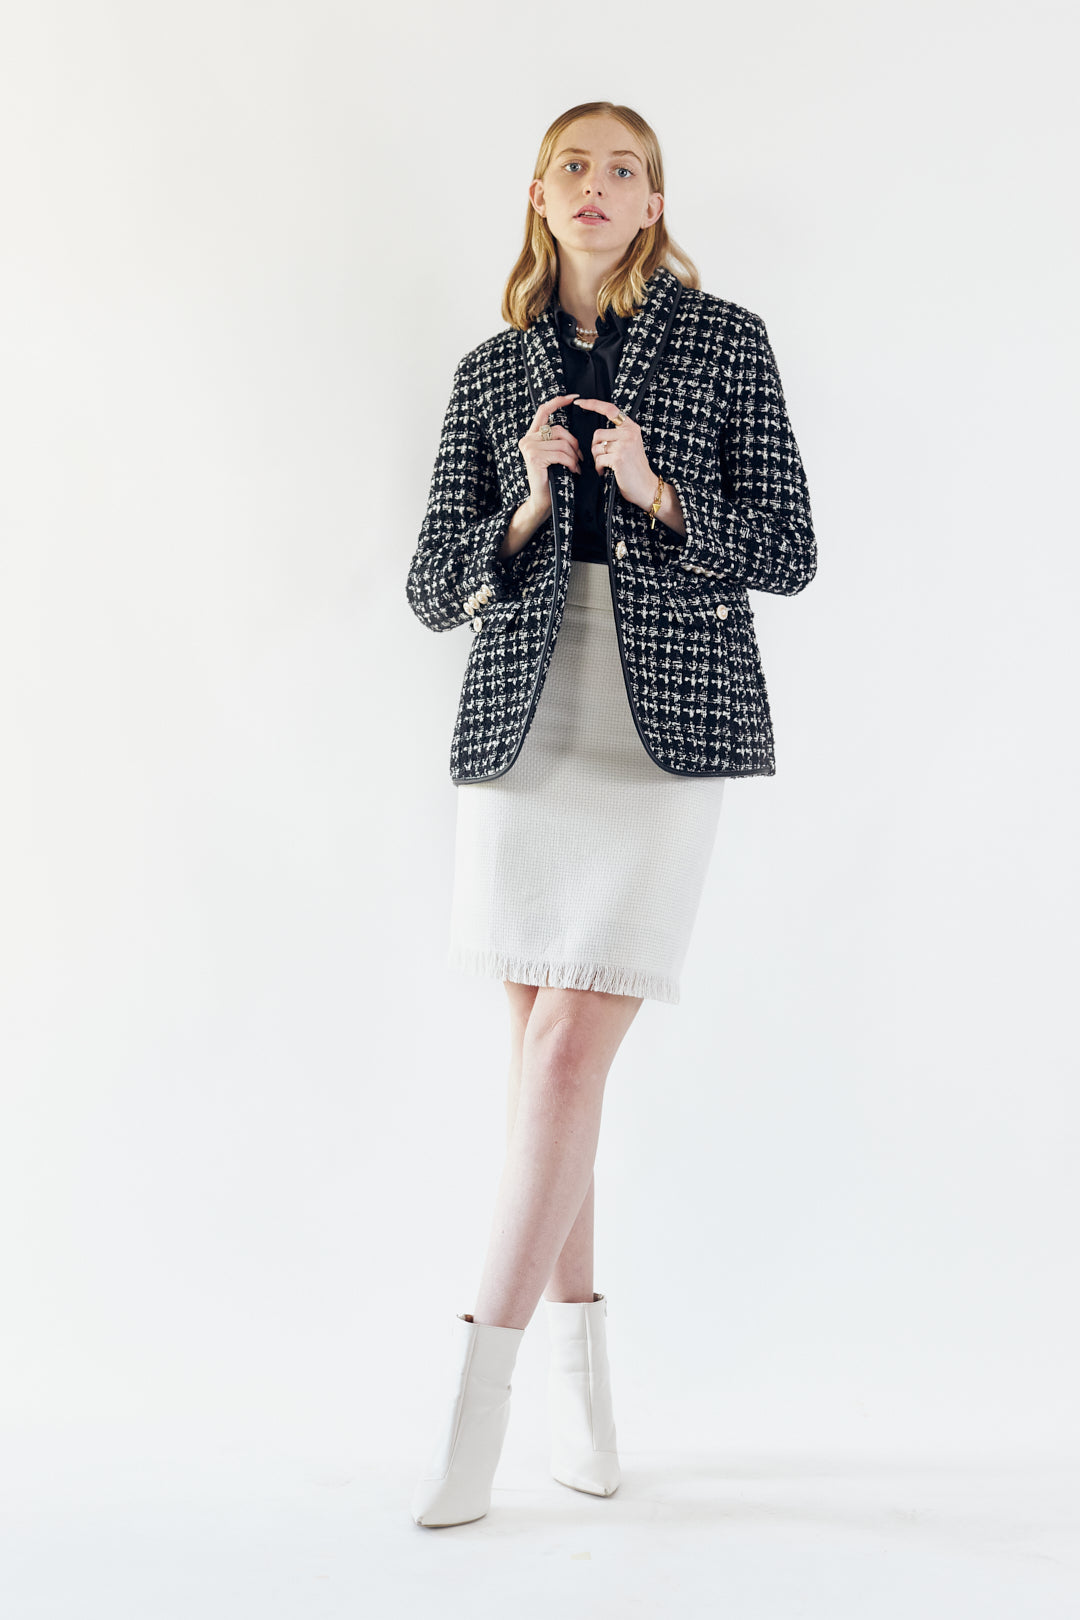 Power Woman - White Tweed Skirt: The Epitome of Elegance by Le Réussi